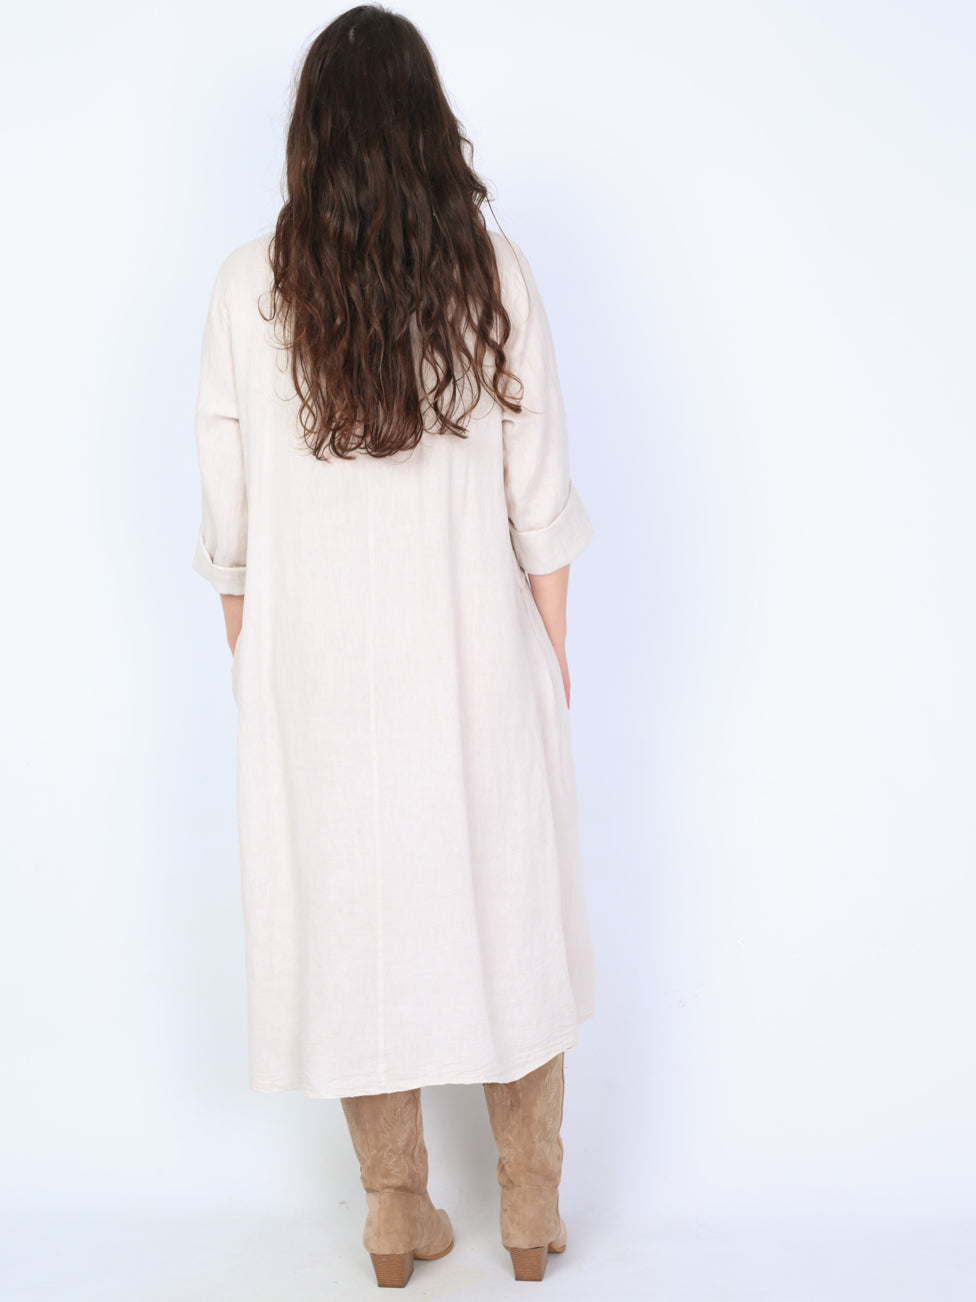 Krone 1 linen dress with buttons